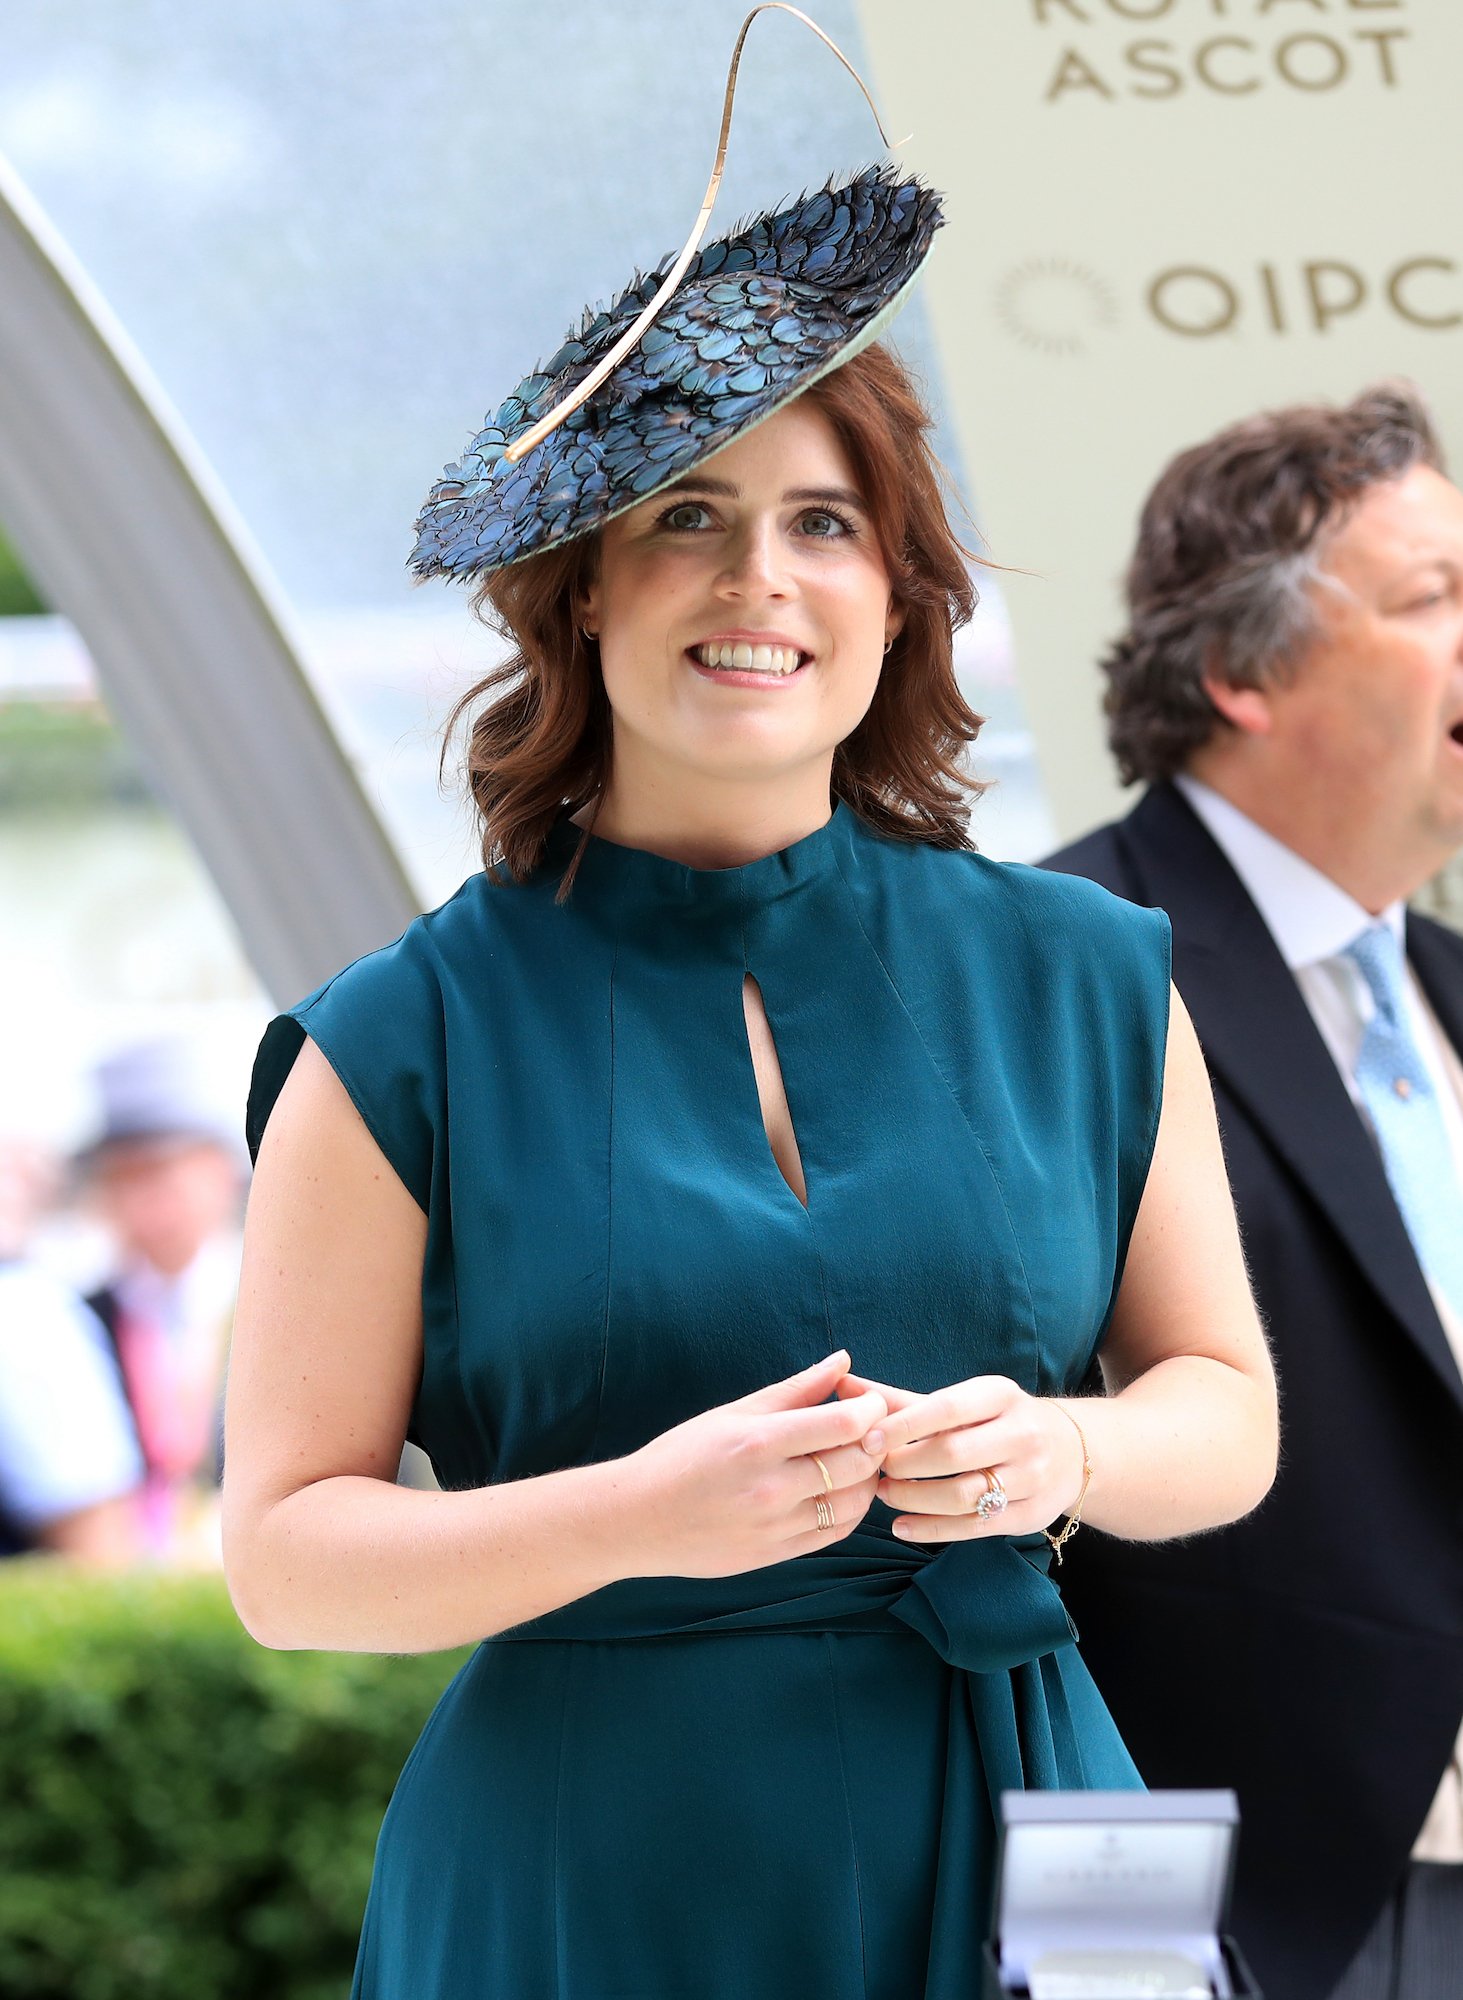 Princess Eugenie attending the Royal Ascot in 2019